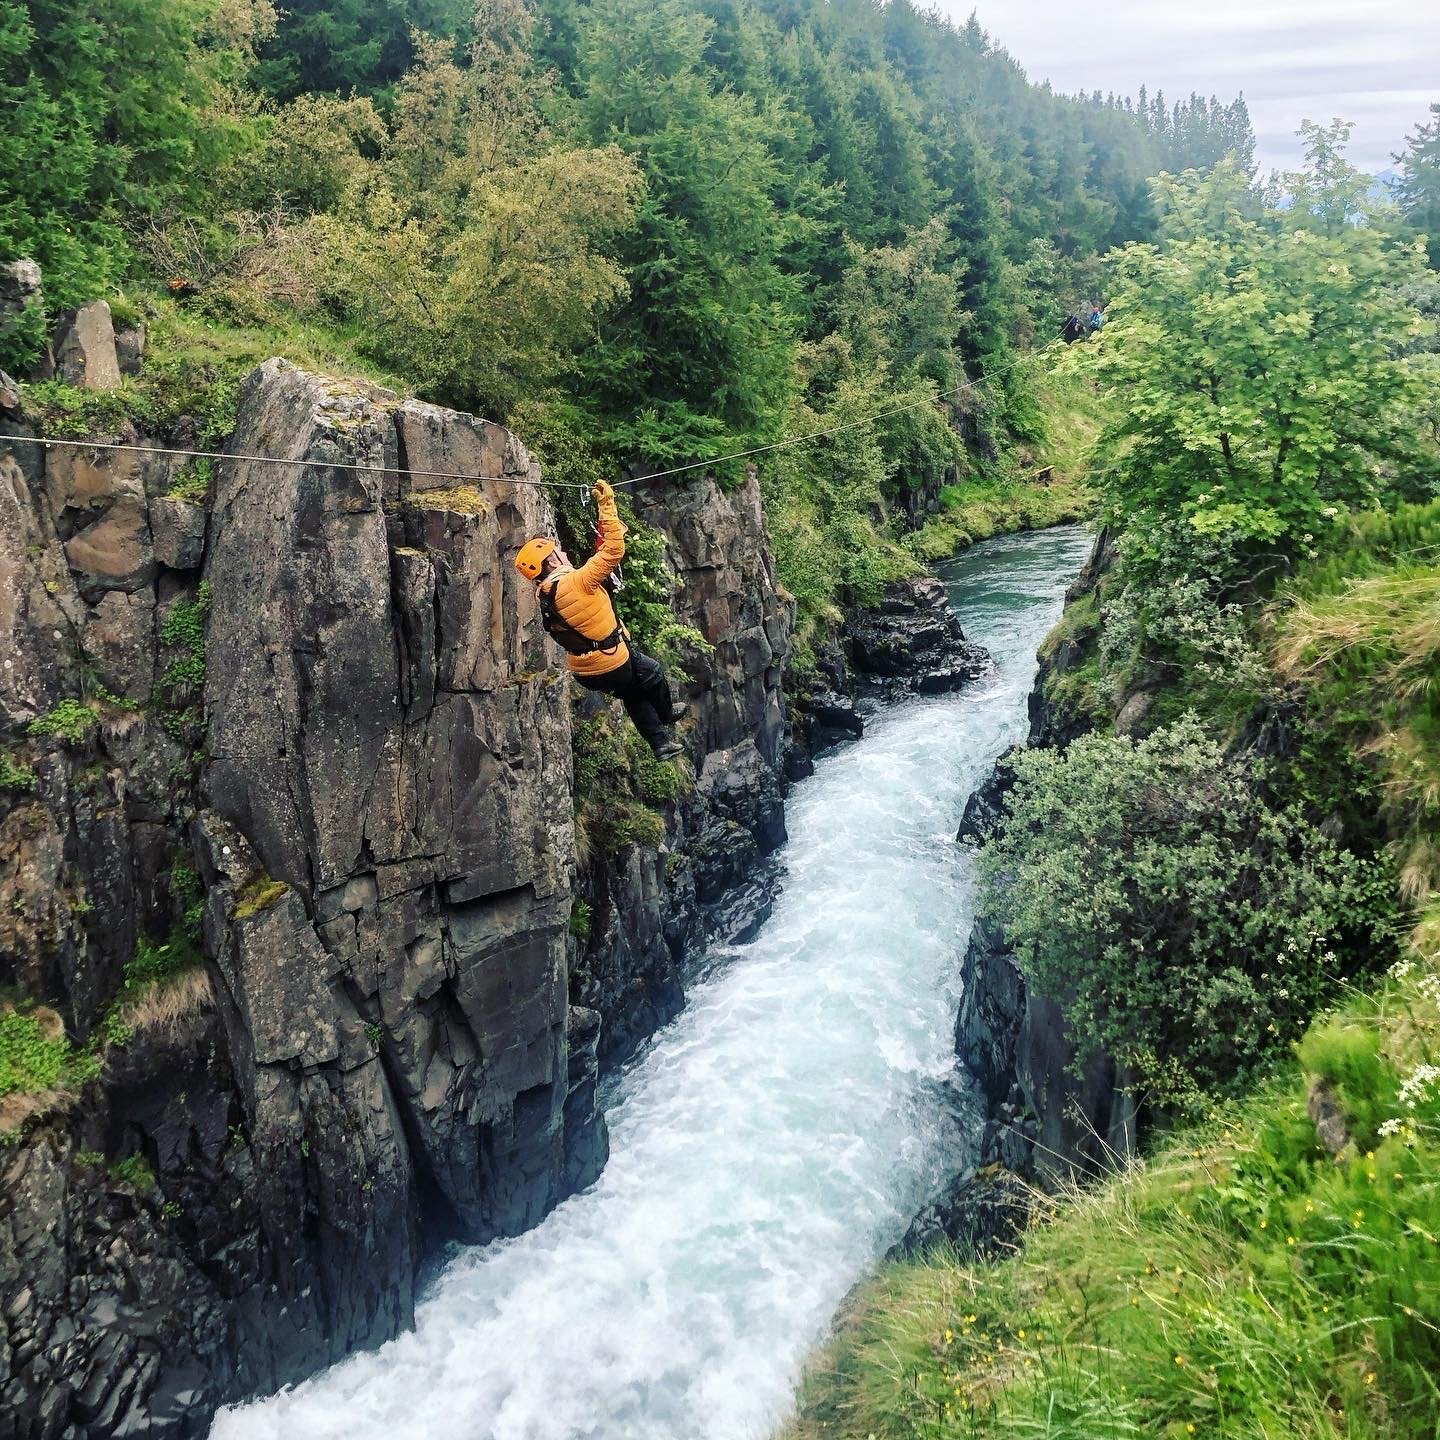 A person is harnessed to a zipline and is traveling high above river rapids, with a rocky canyon and trees on either side